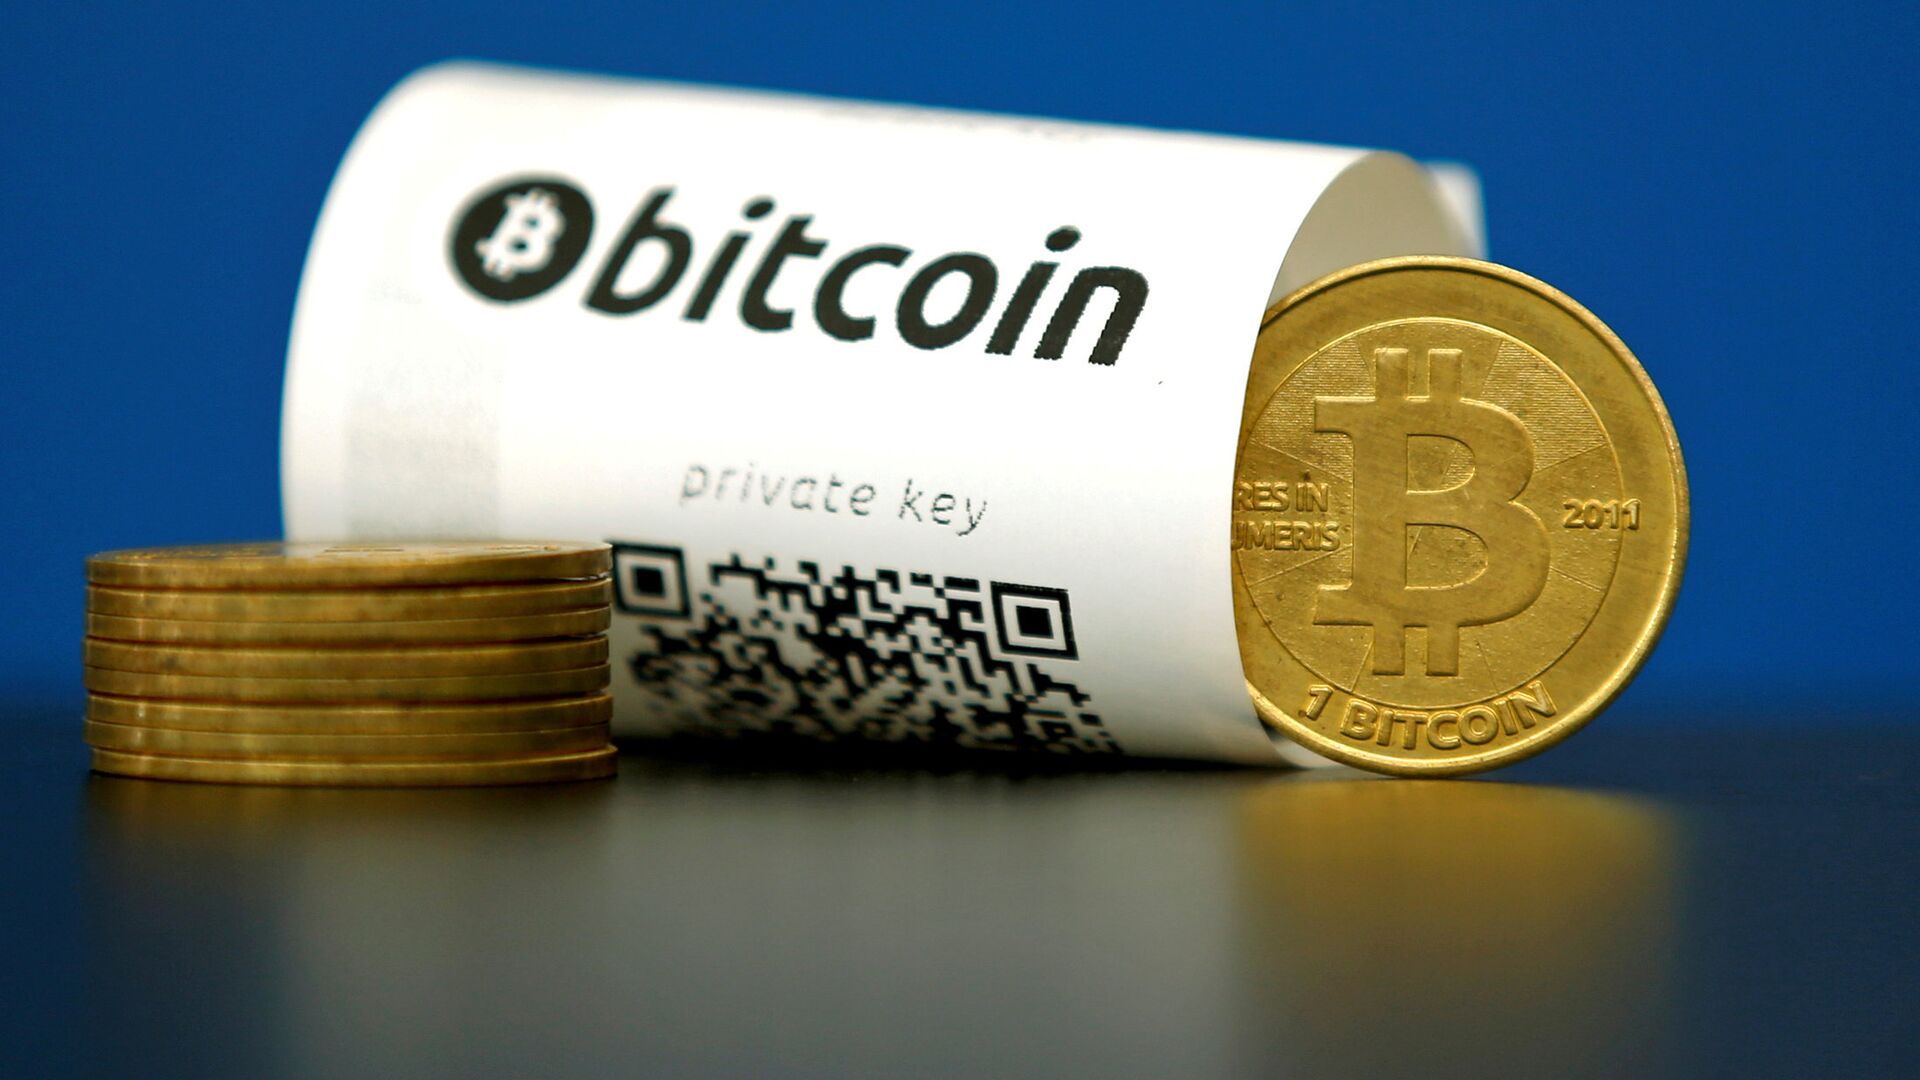 A Bitcoin (virtual currency) paper wallet with QR codes and a coin are seen in an illustration picture taken at La Maison du Bitcoin in Paris, France May 27, 2015 - سبوتنيك عربي, 1920, 22.09.2021